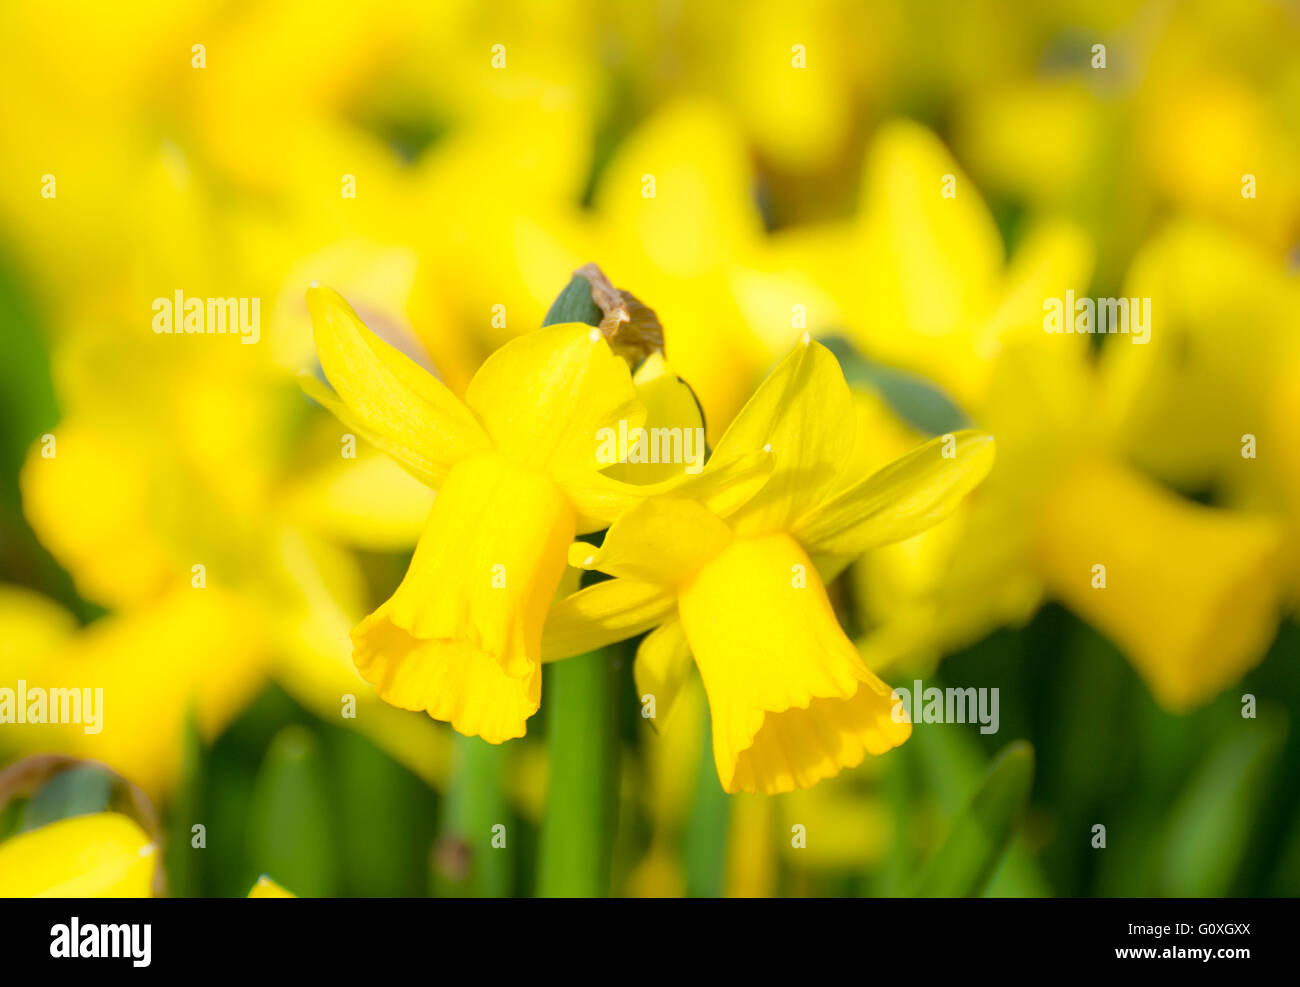 Springtime - flowerbed with yellow daffodil flowers Stock Photo